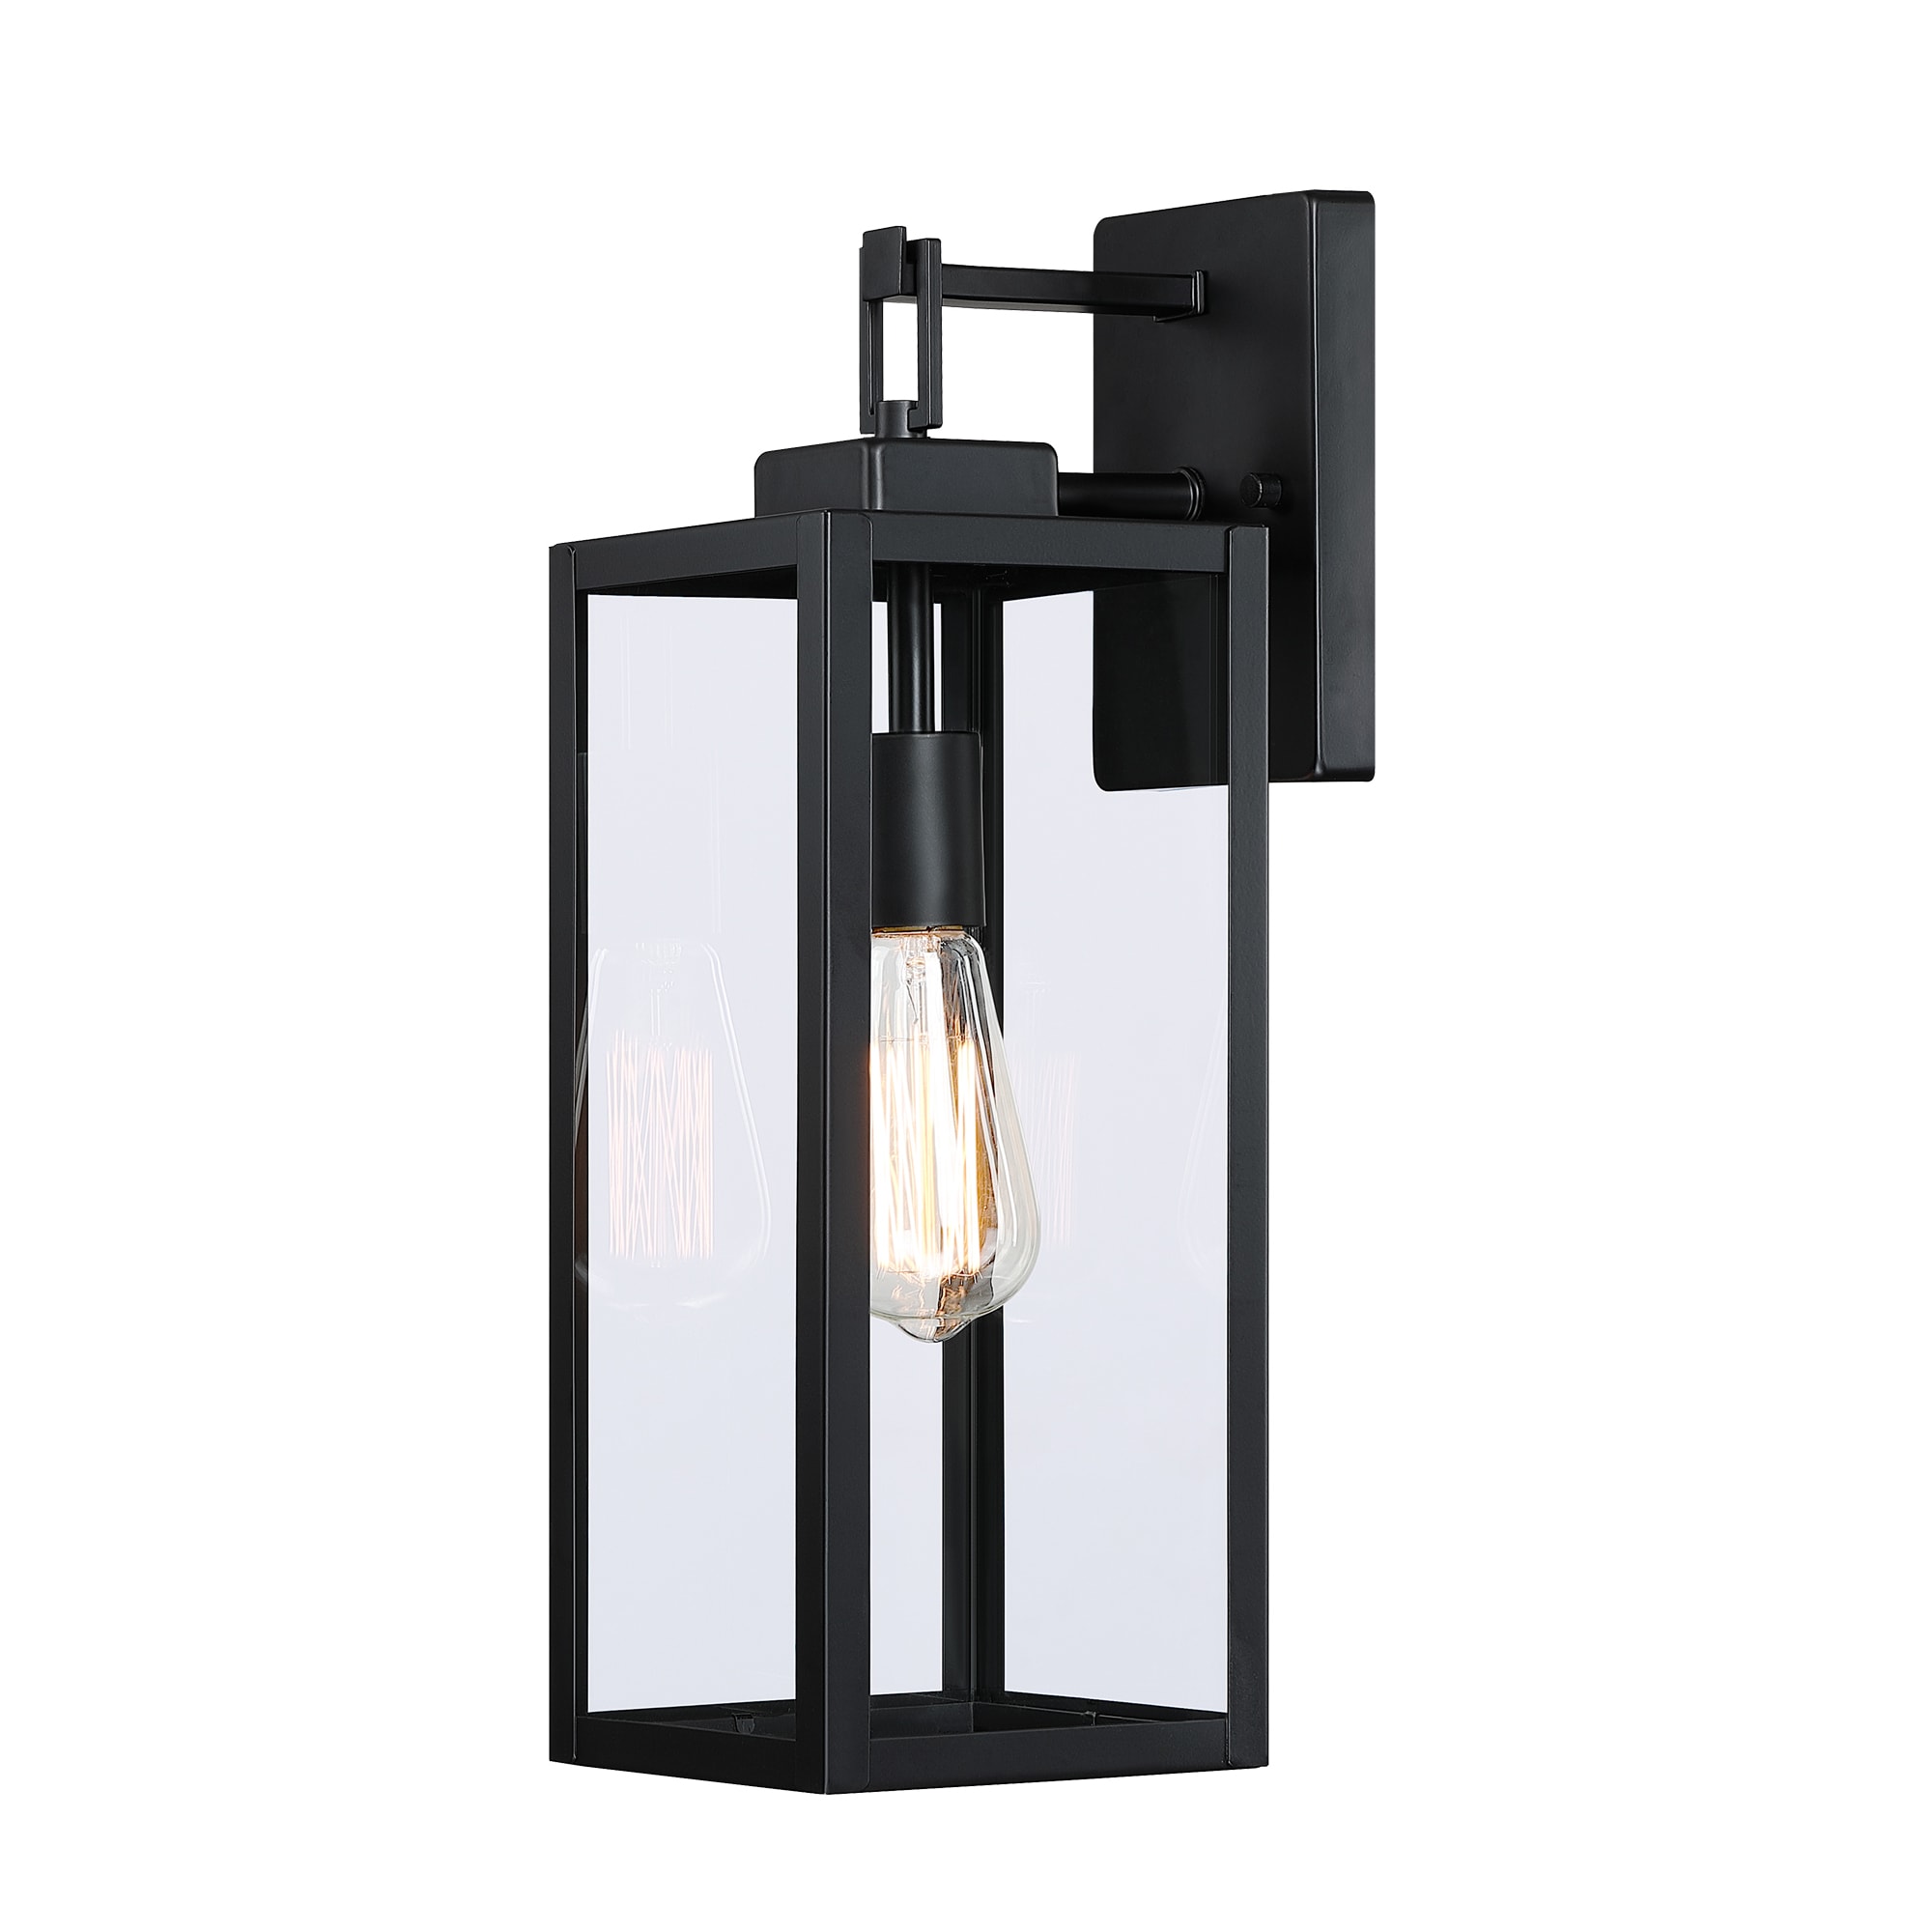 Hukoro Wall Lantern Sconce 1-Light 17.62-in Matte Black Outdoor Wall Light in the Wall Lights department at Lowes.com